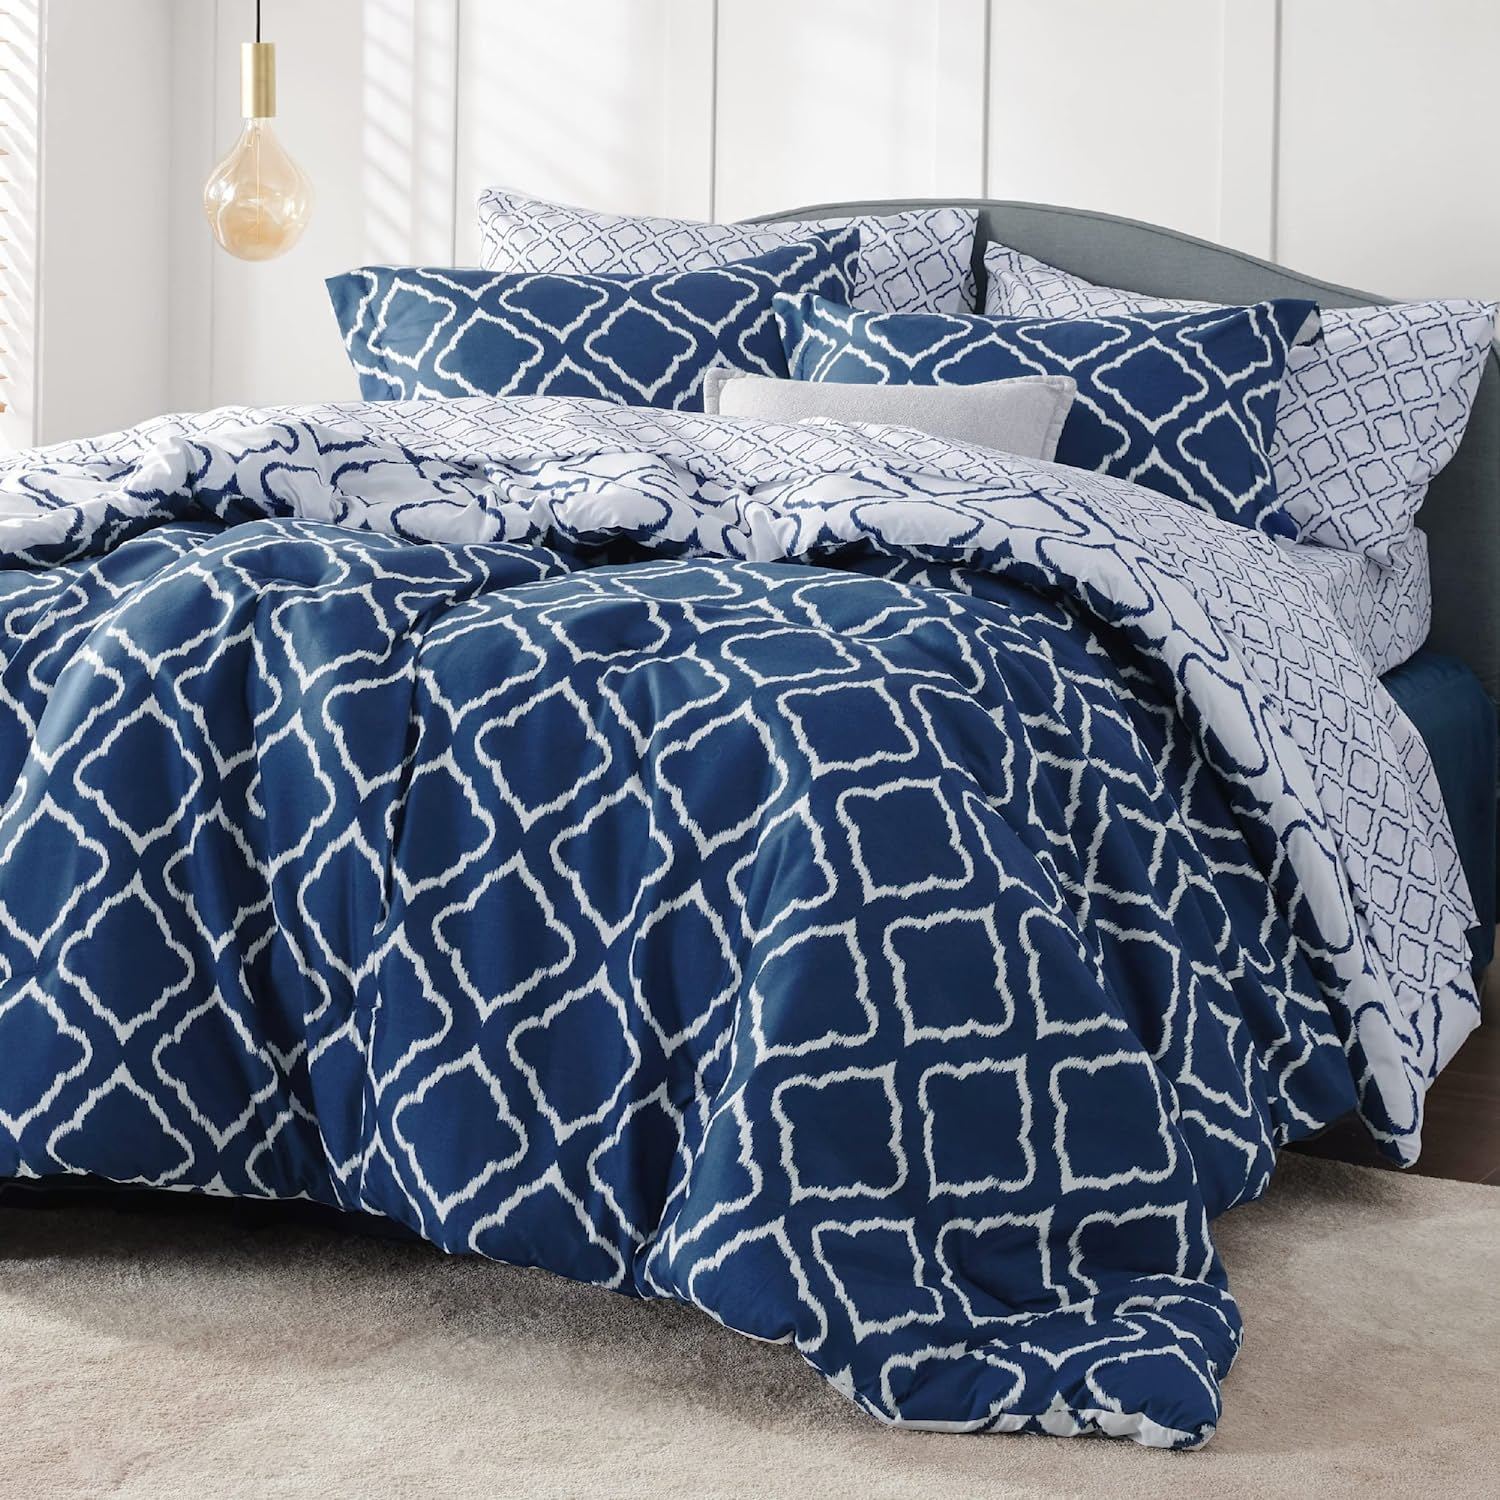 Bedsure Bed in A Bag - Full/Queen Bed Sets 8 Pieces,Queen Size, Navy Blue - $61.99